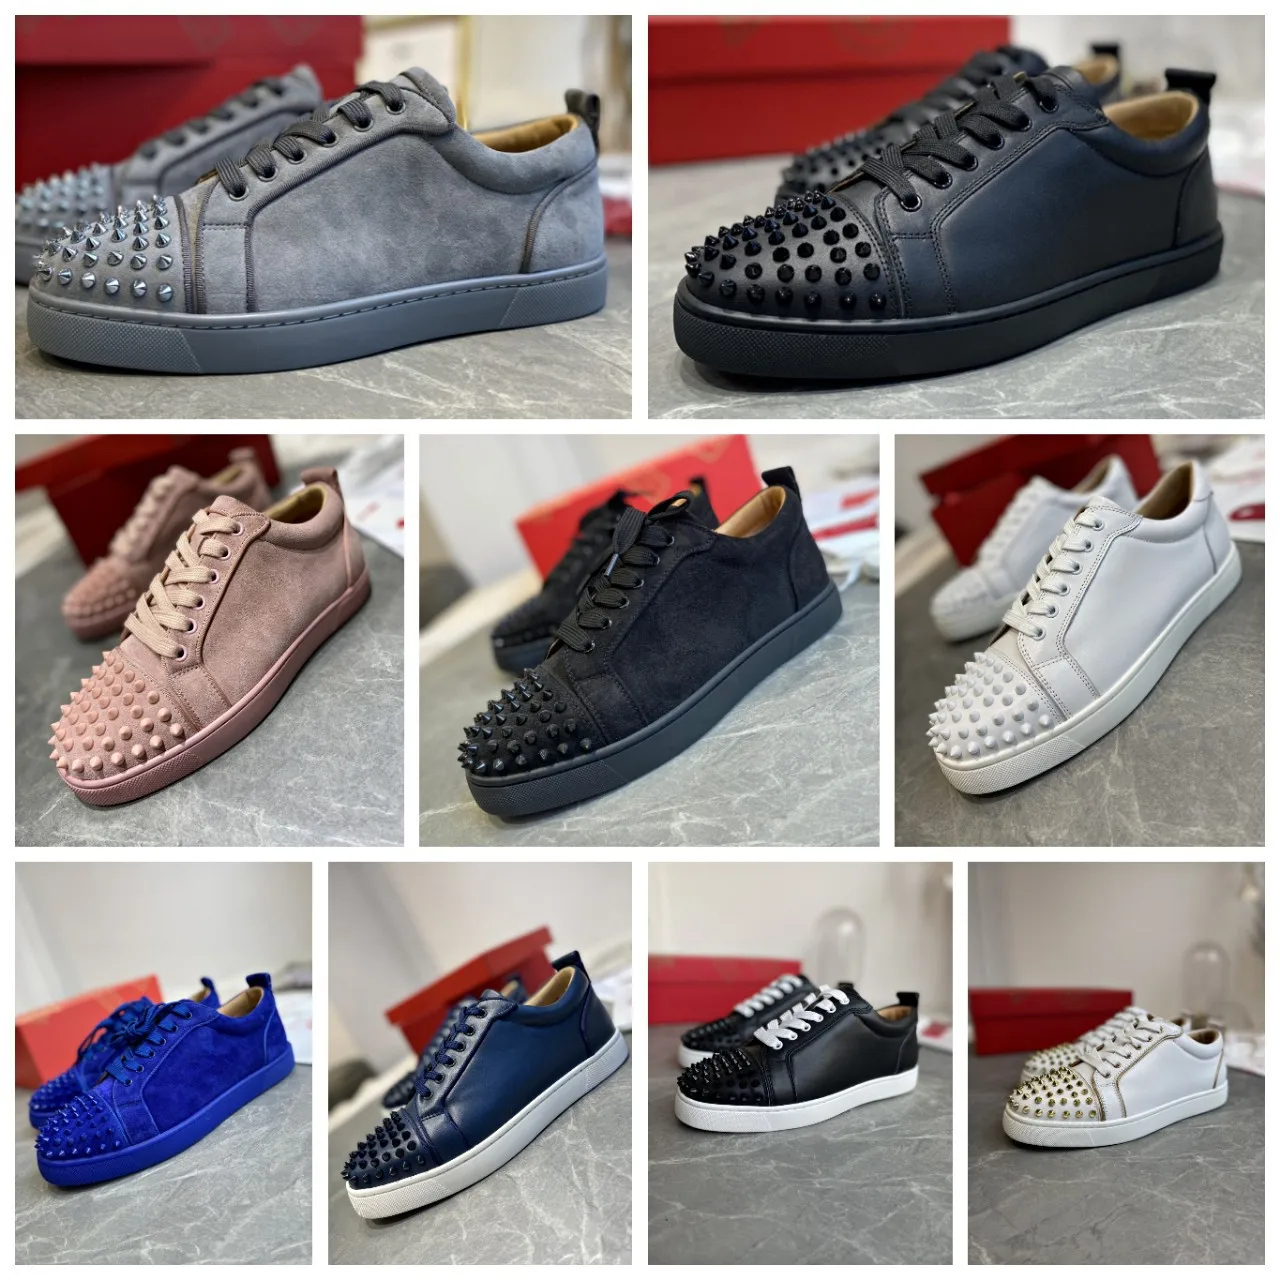 

Luxury Brand Design High Quality Red Bottom Shoes For Men Fashion Spikes Casual Shoes Rivets Skateboard Flats Sneakers